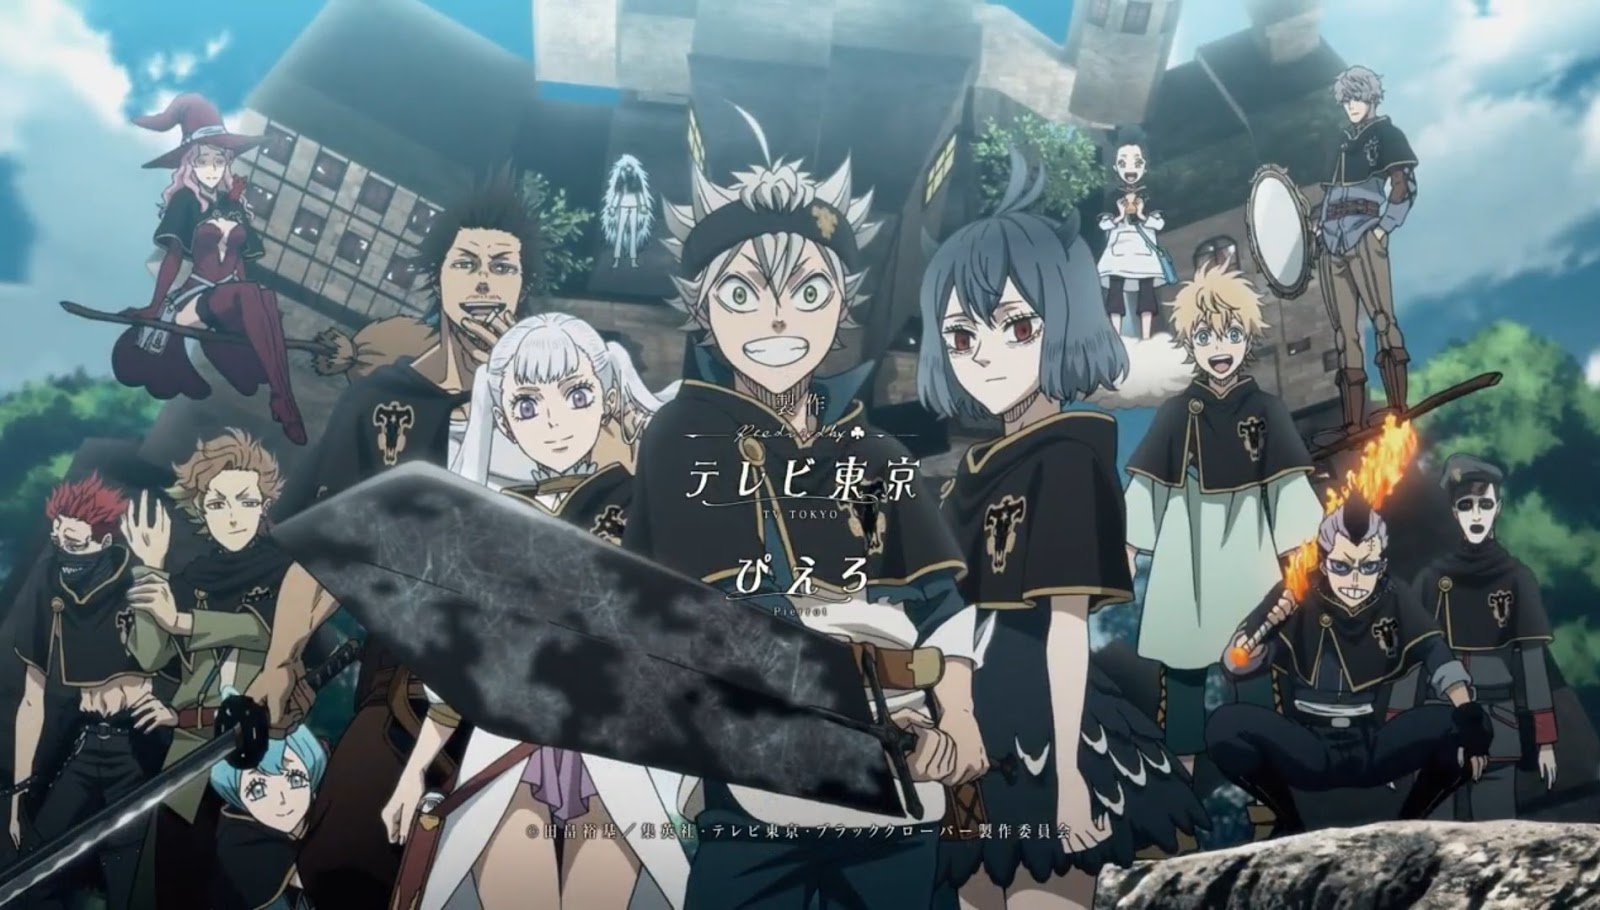 Black Clover Episode 125,126,127,128,129 Release Date, Titles, Synopsis